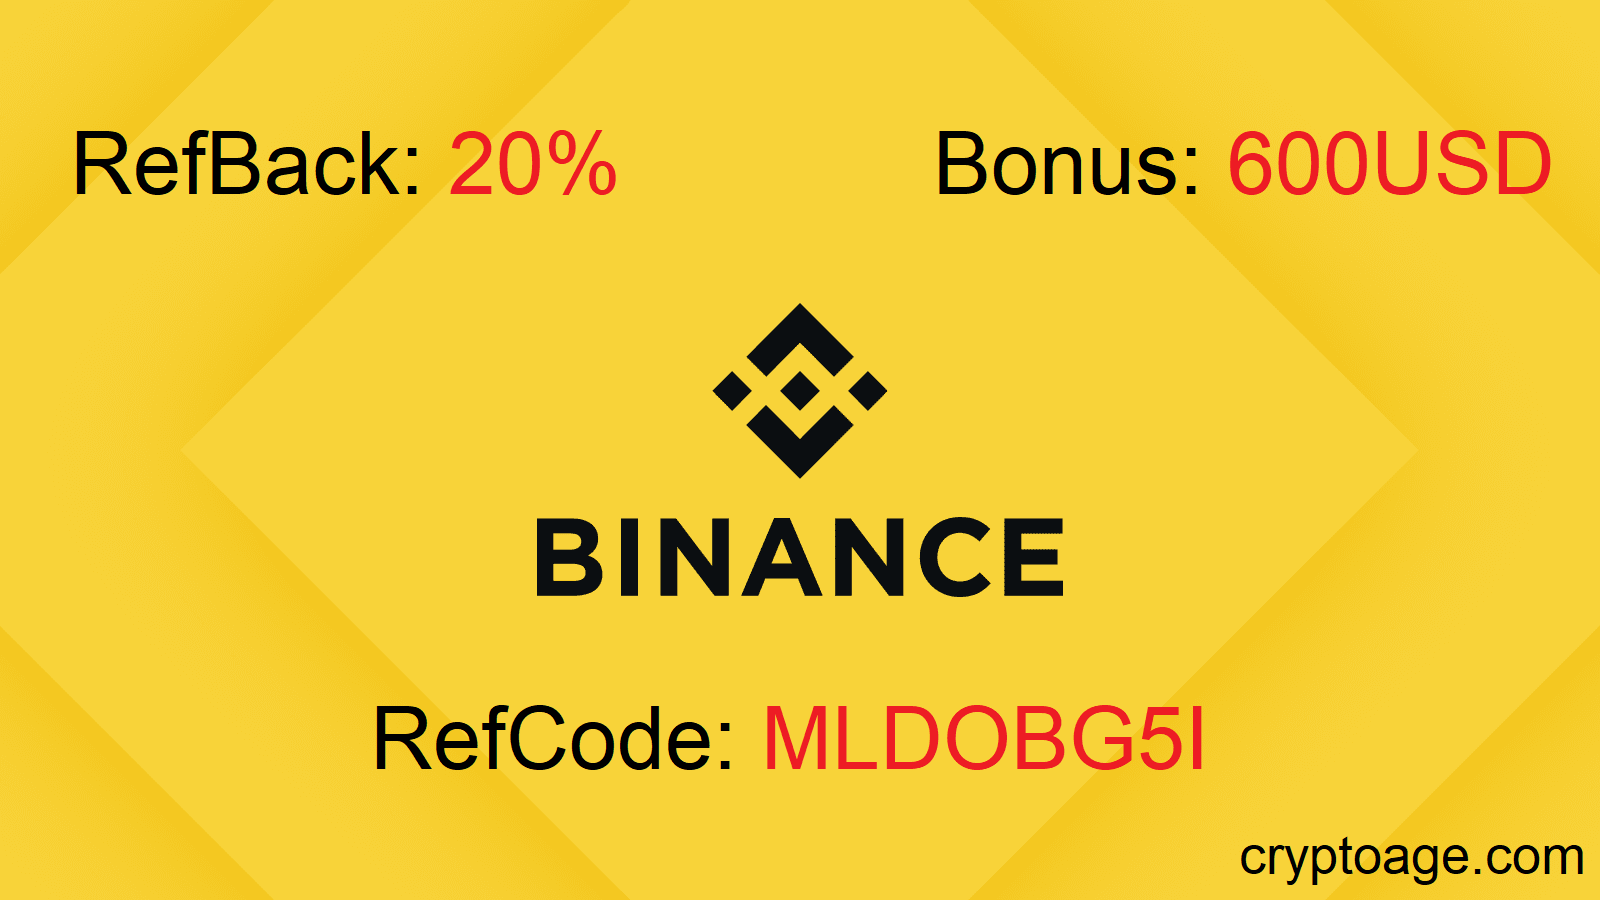 binance referral code with 20% cashback and sign-up bonus 600